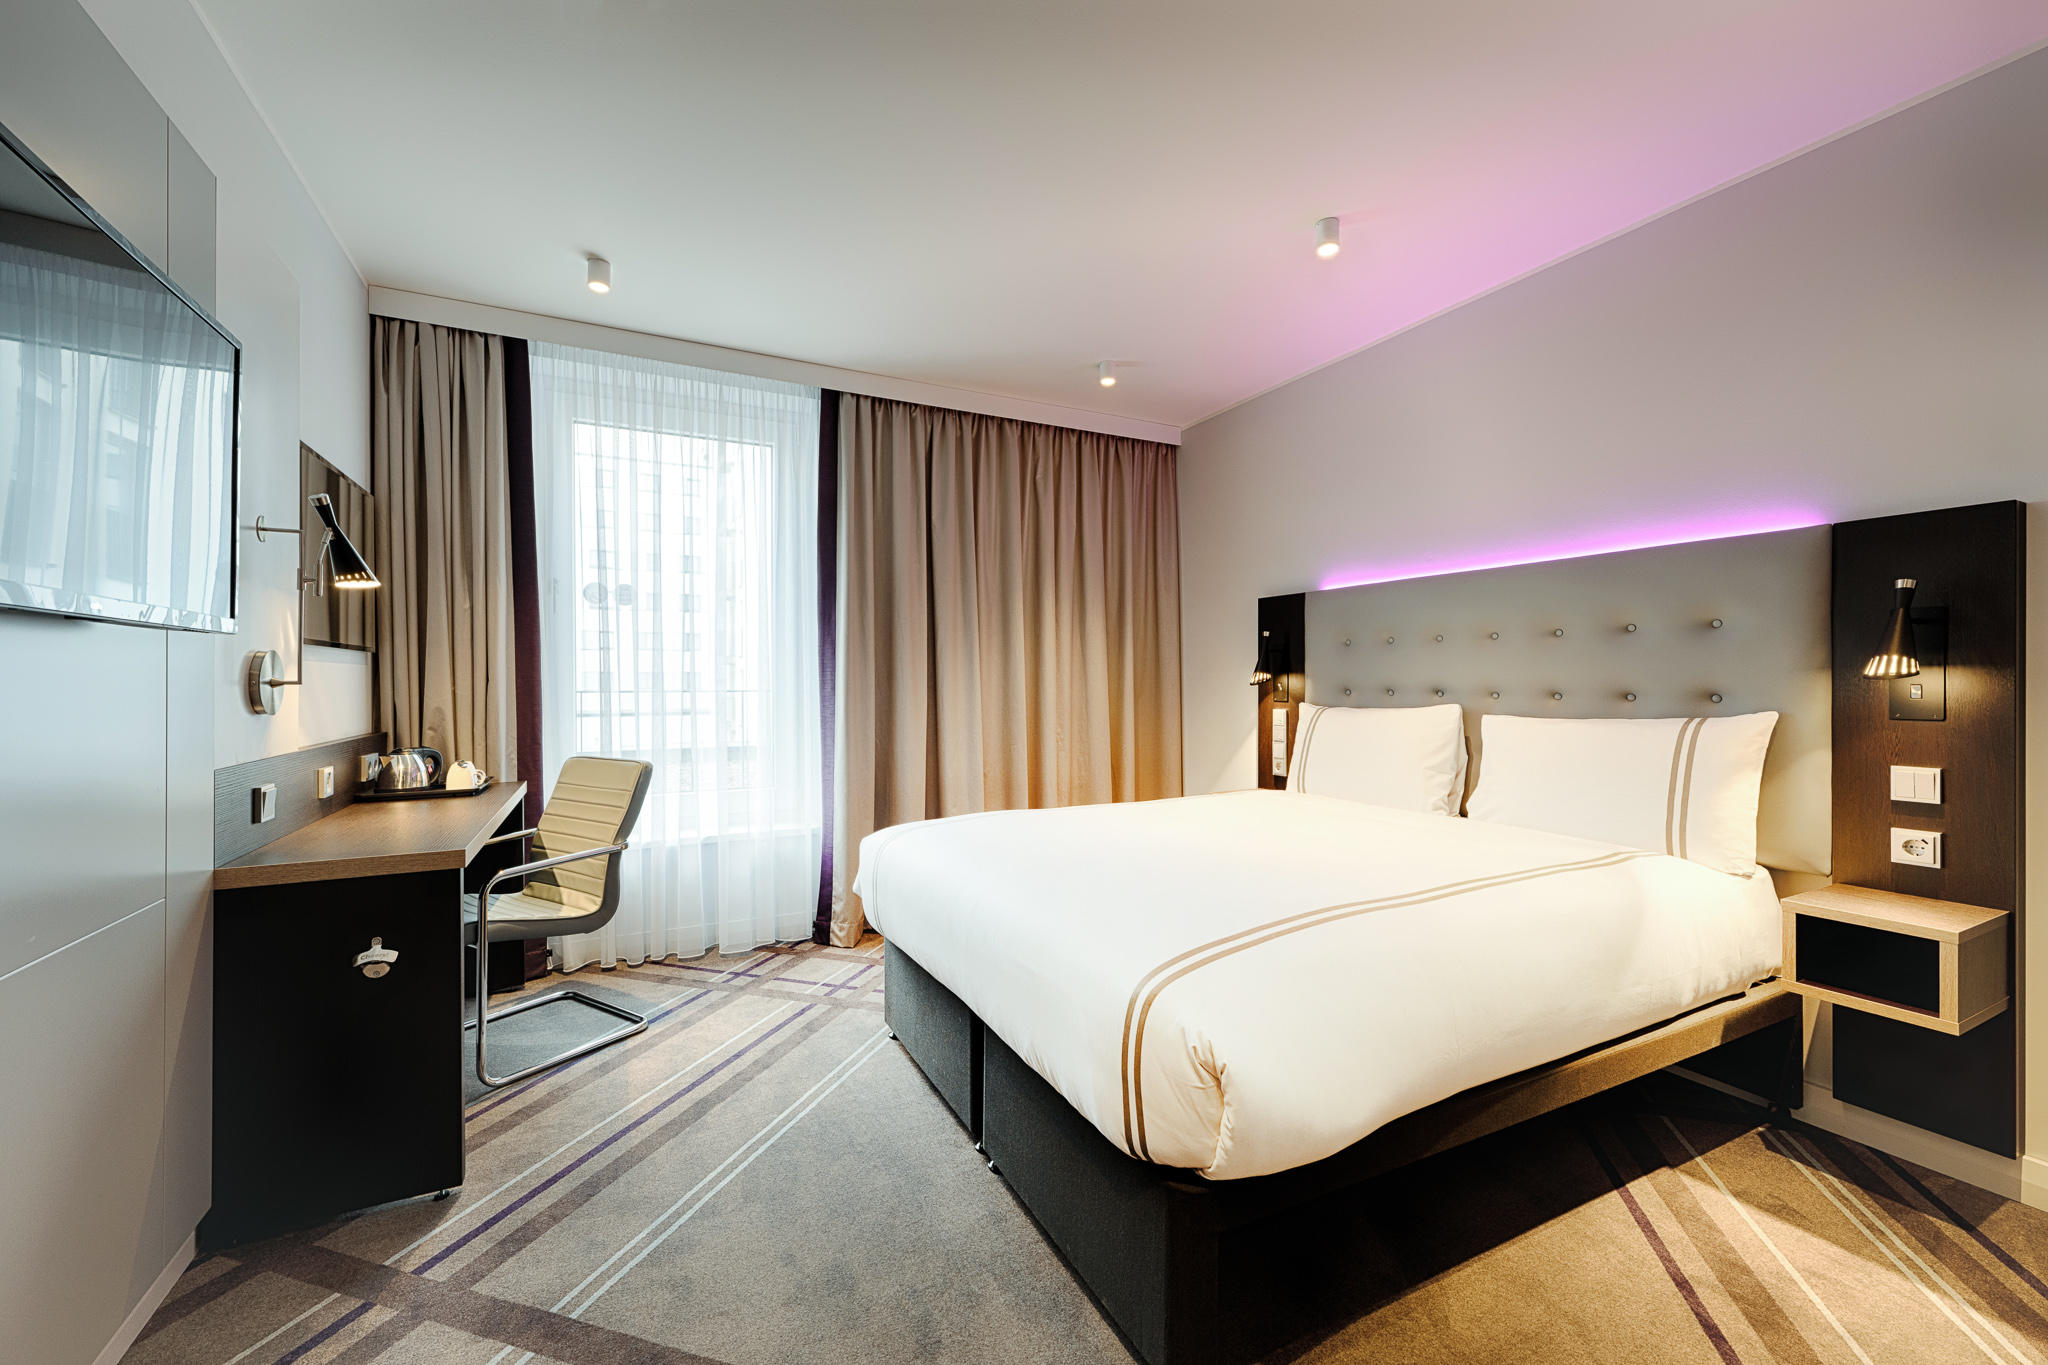 Premier Inn Hamburg City Klostertor hotel accessible room with lowered bed